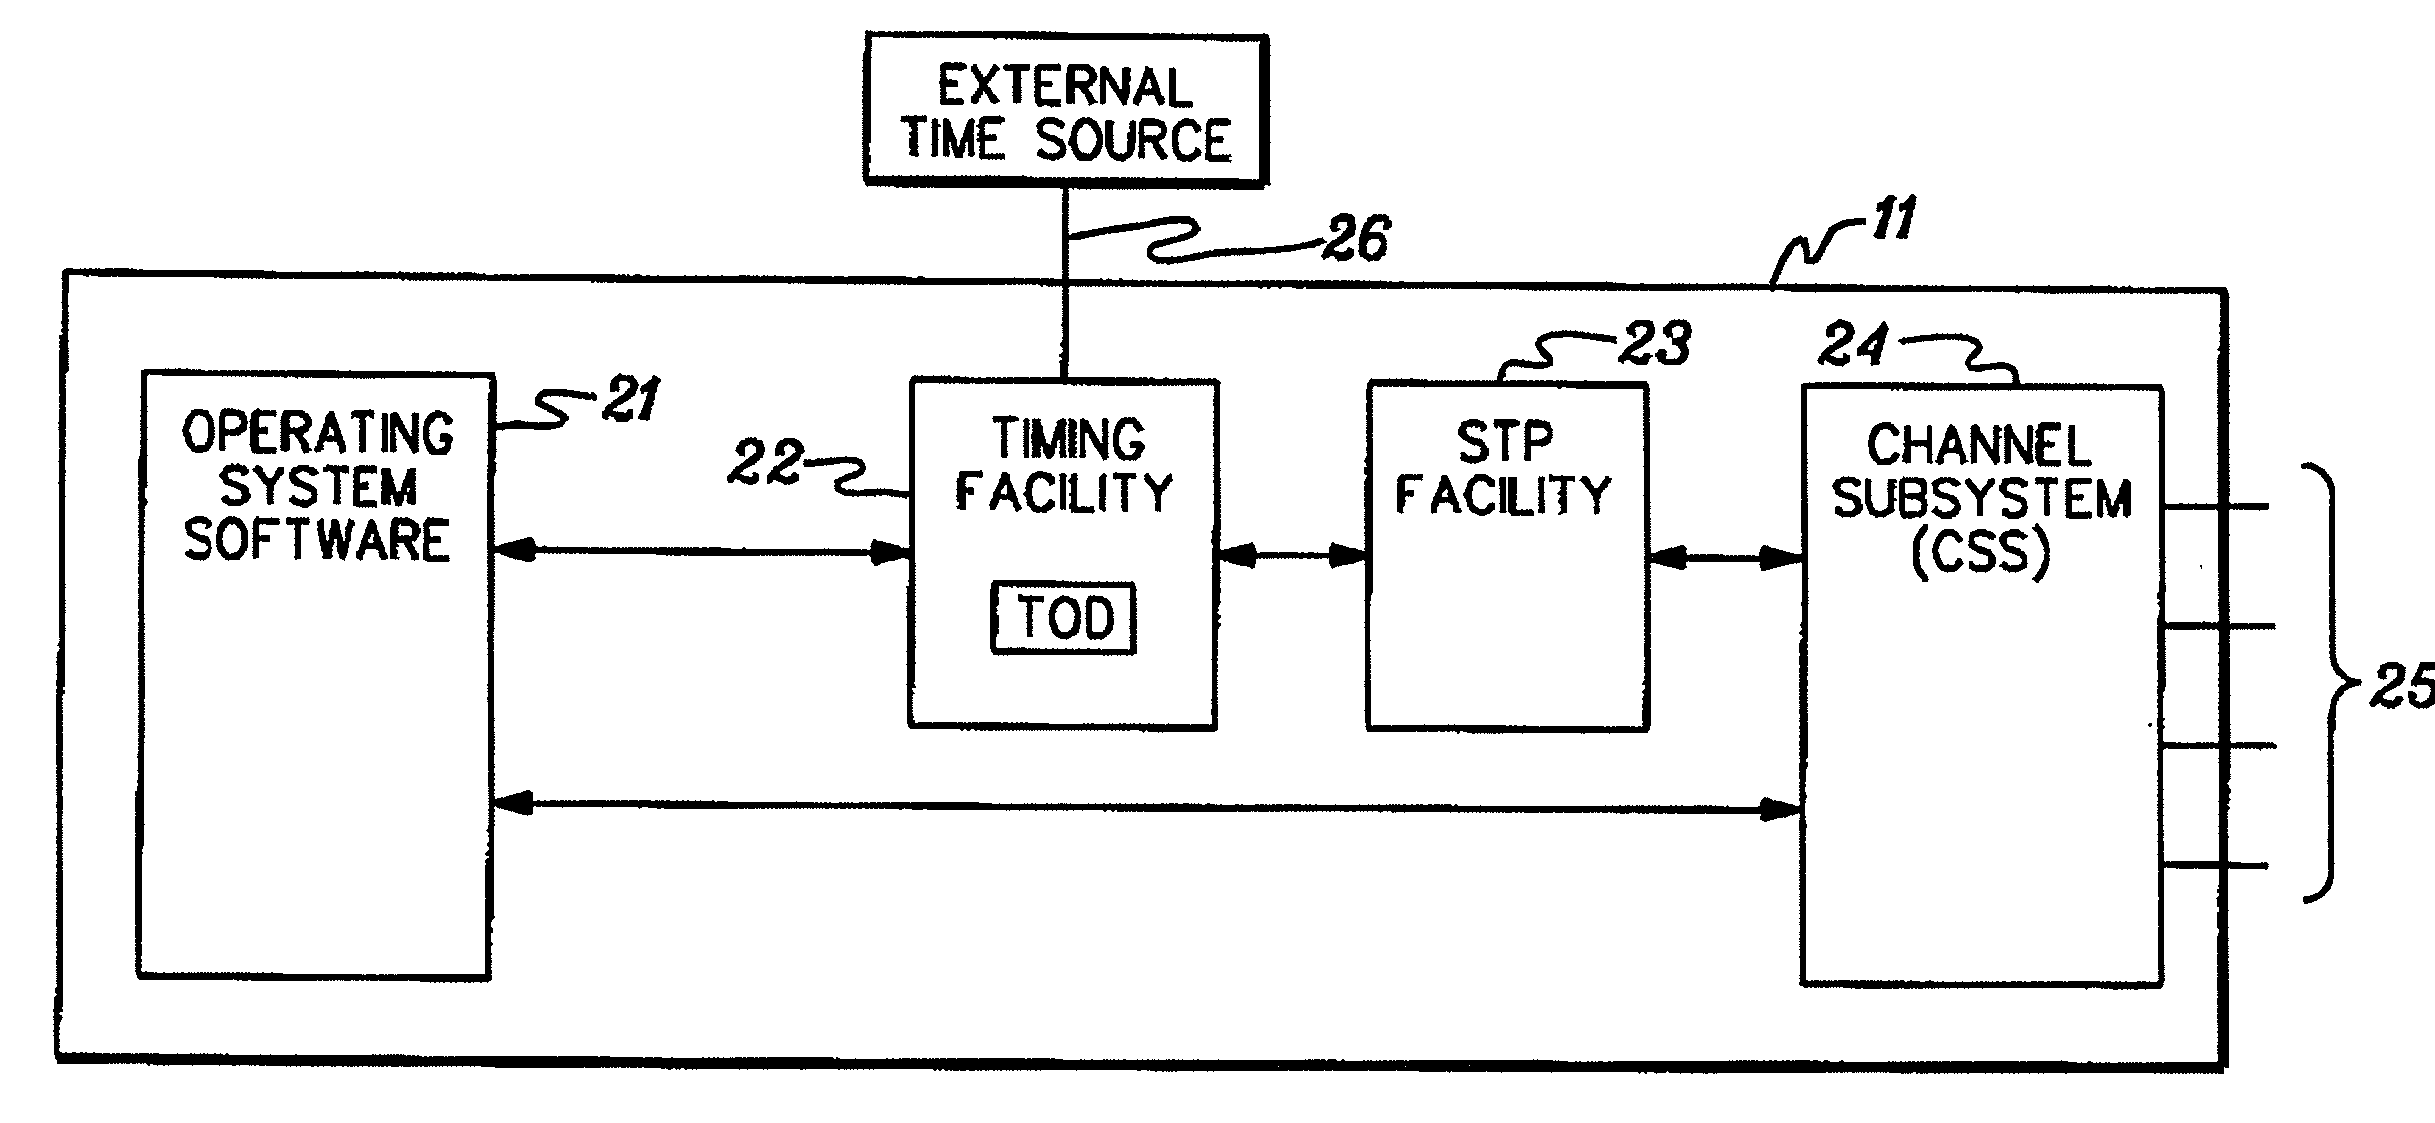 Establishing a logical path between servers in a coordinated timing network